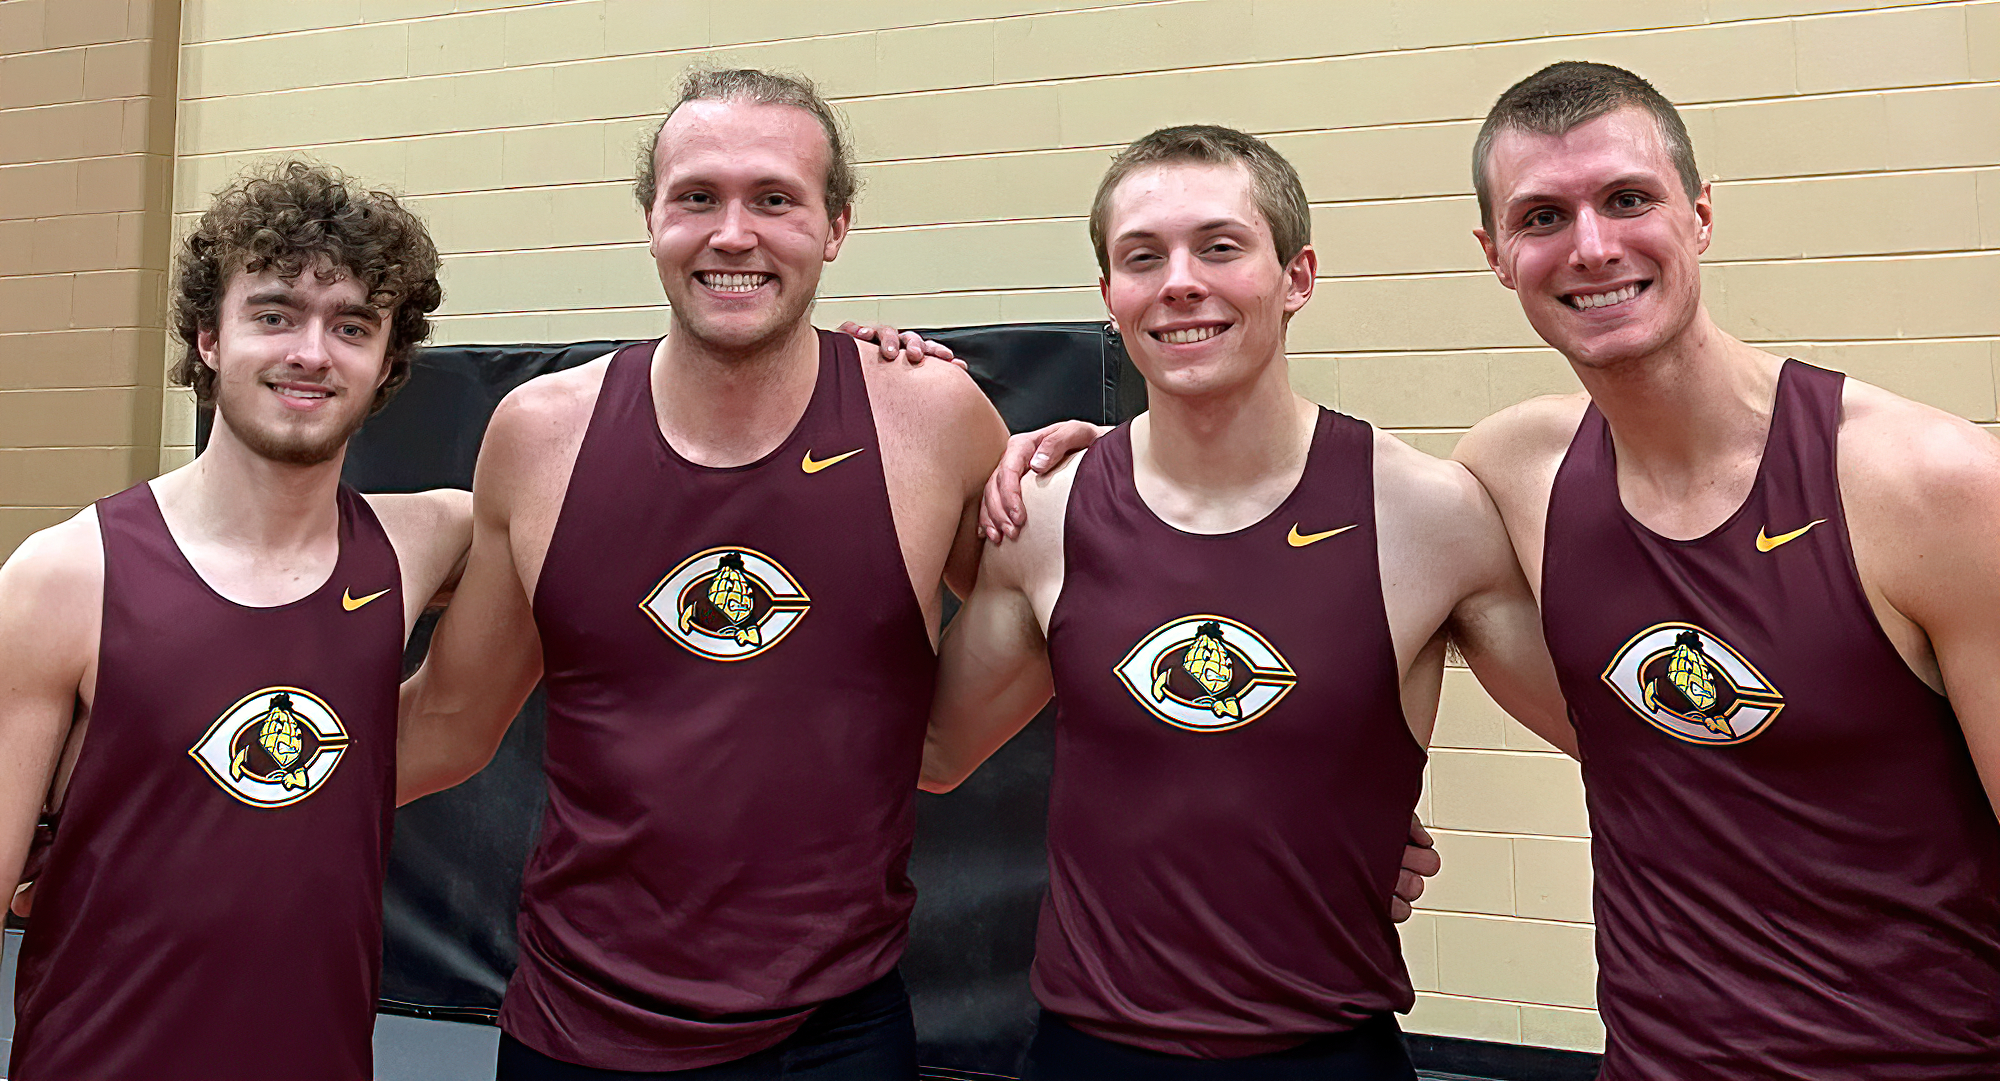 The 4x400-meter relay team of (L-R) Tommy Kern, Colin Schuller, Jesse Middendorf and Cal Wright broke the school record and qualified for nationals.